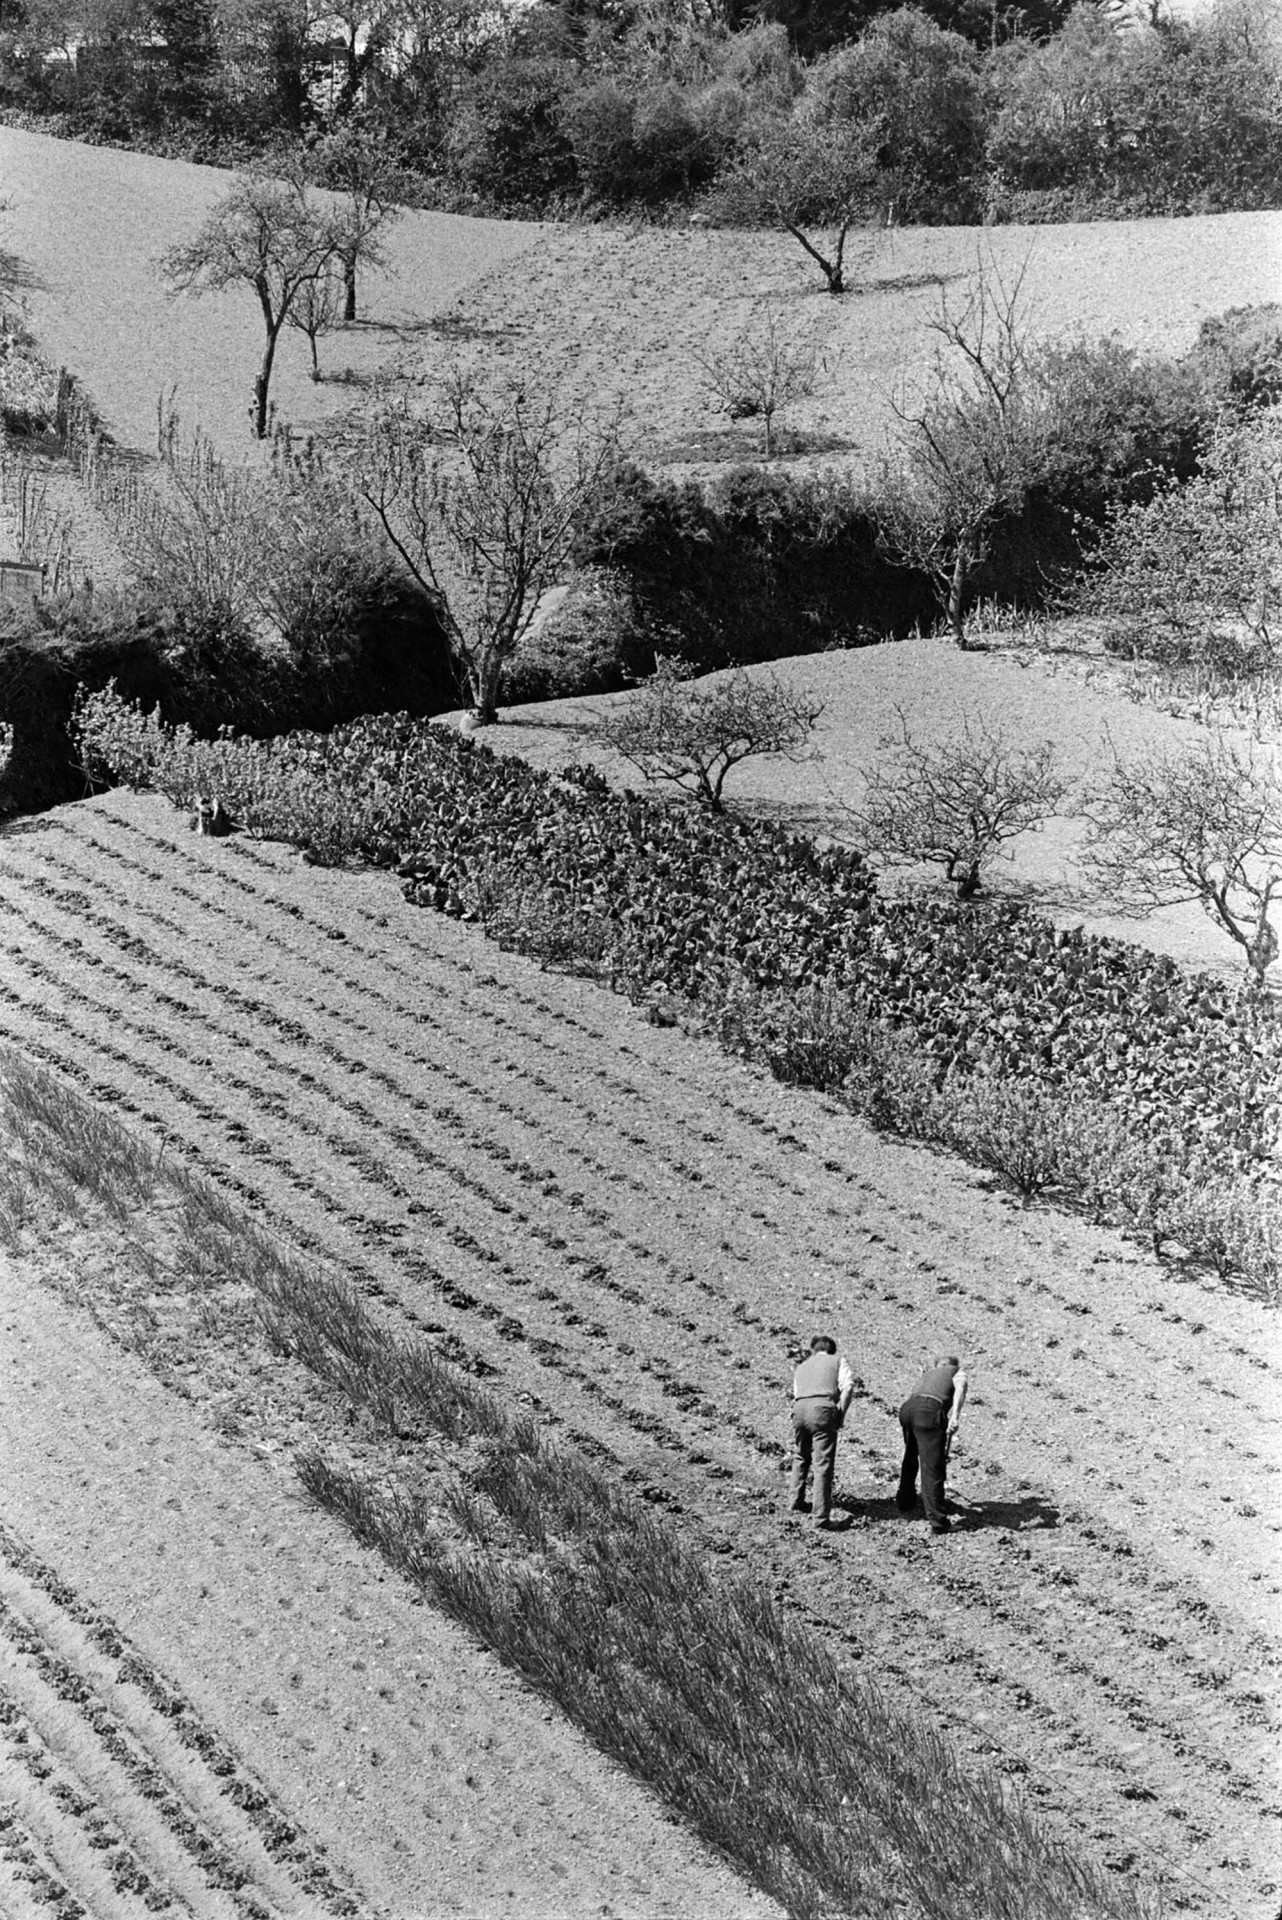 Two men hoeing in a field, possibly of vegetables, at Combe Martin. Trees and another field can be seen in the background.